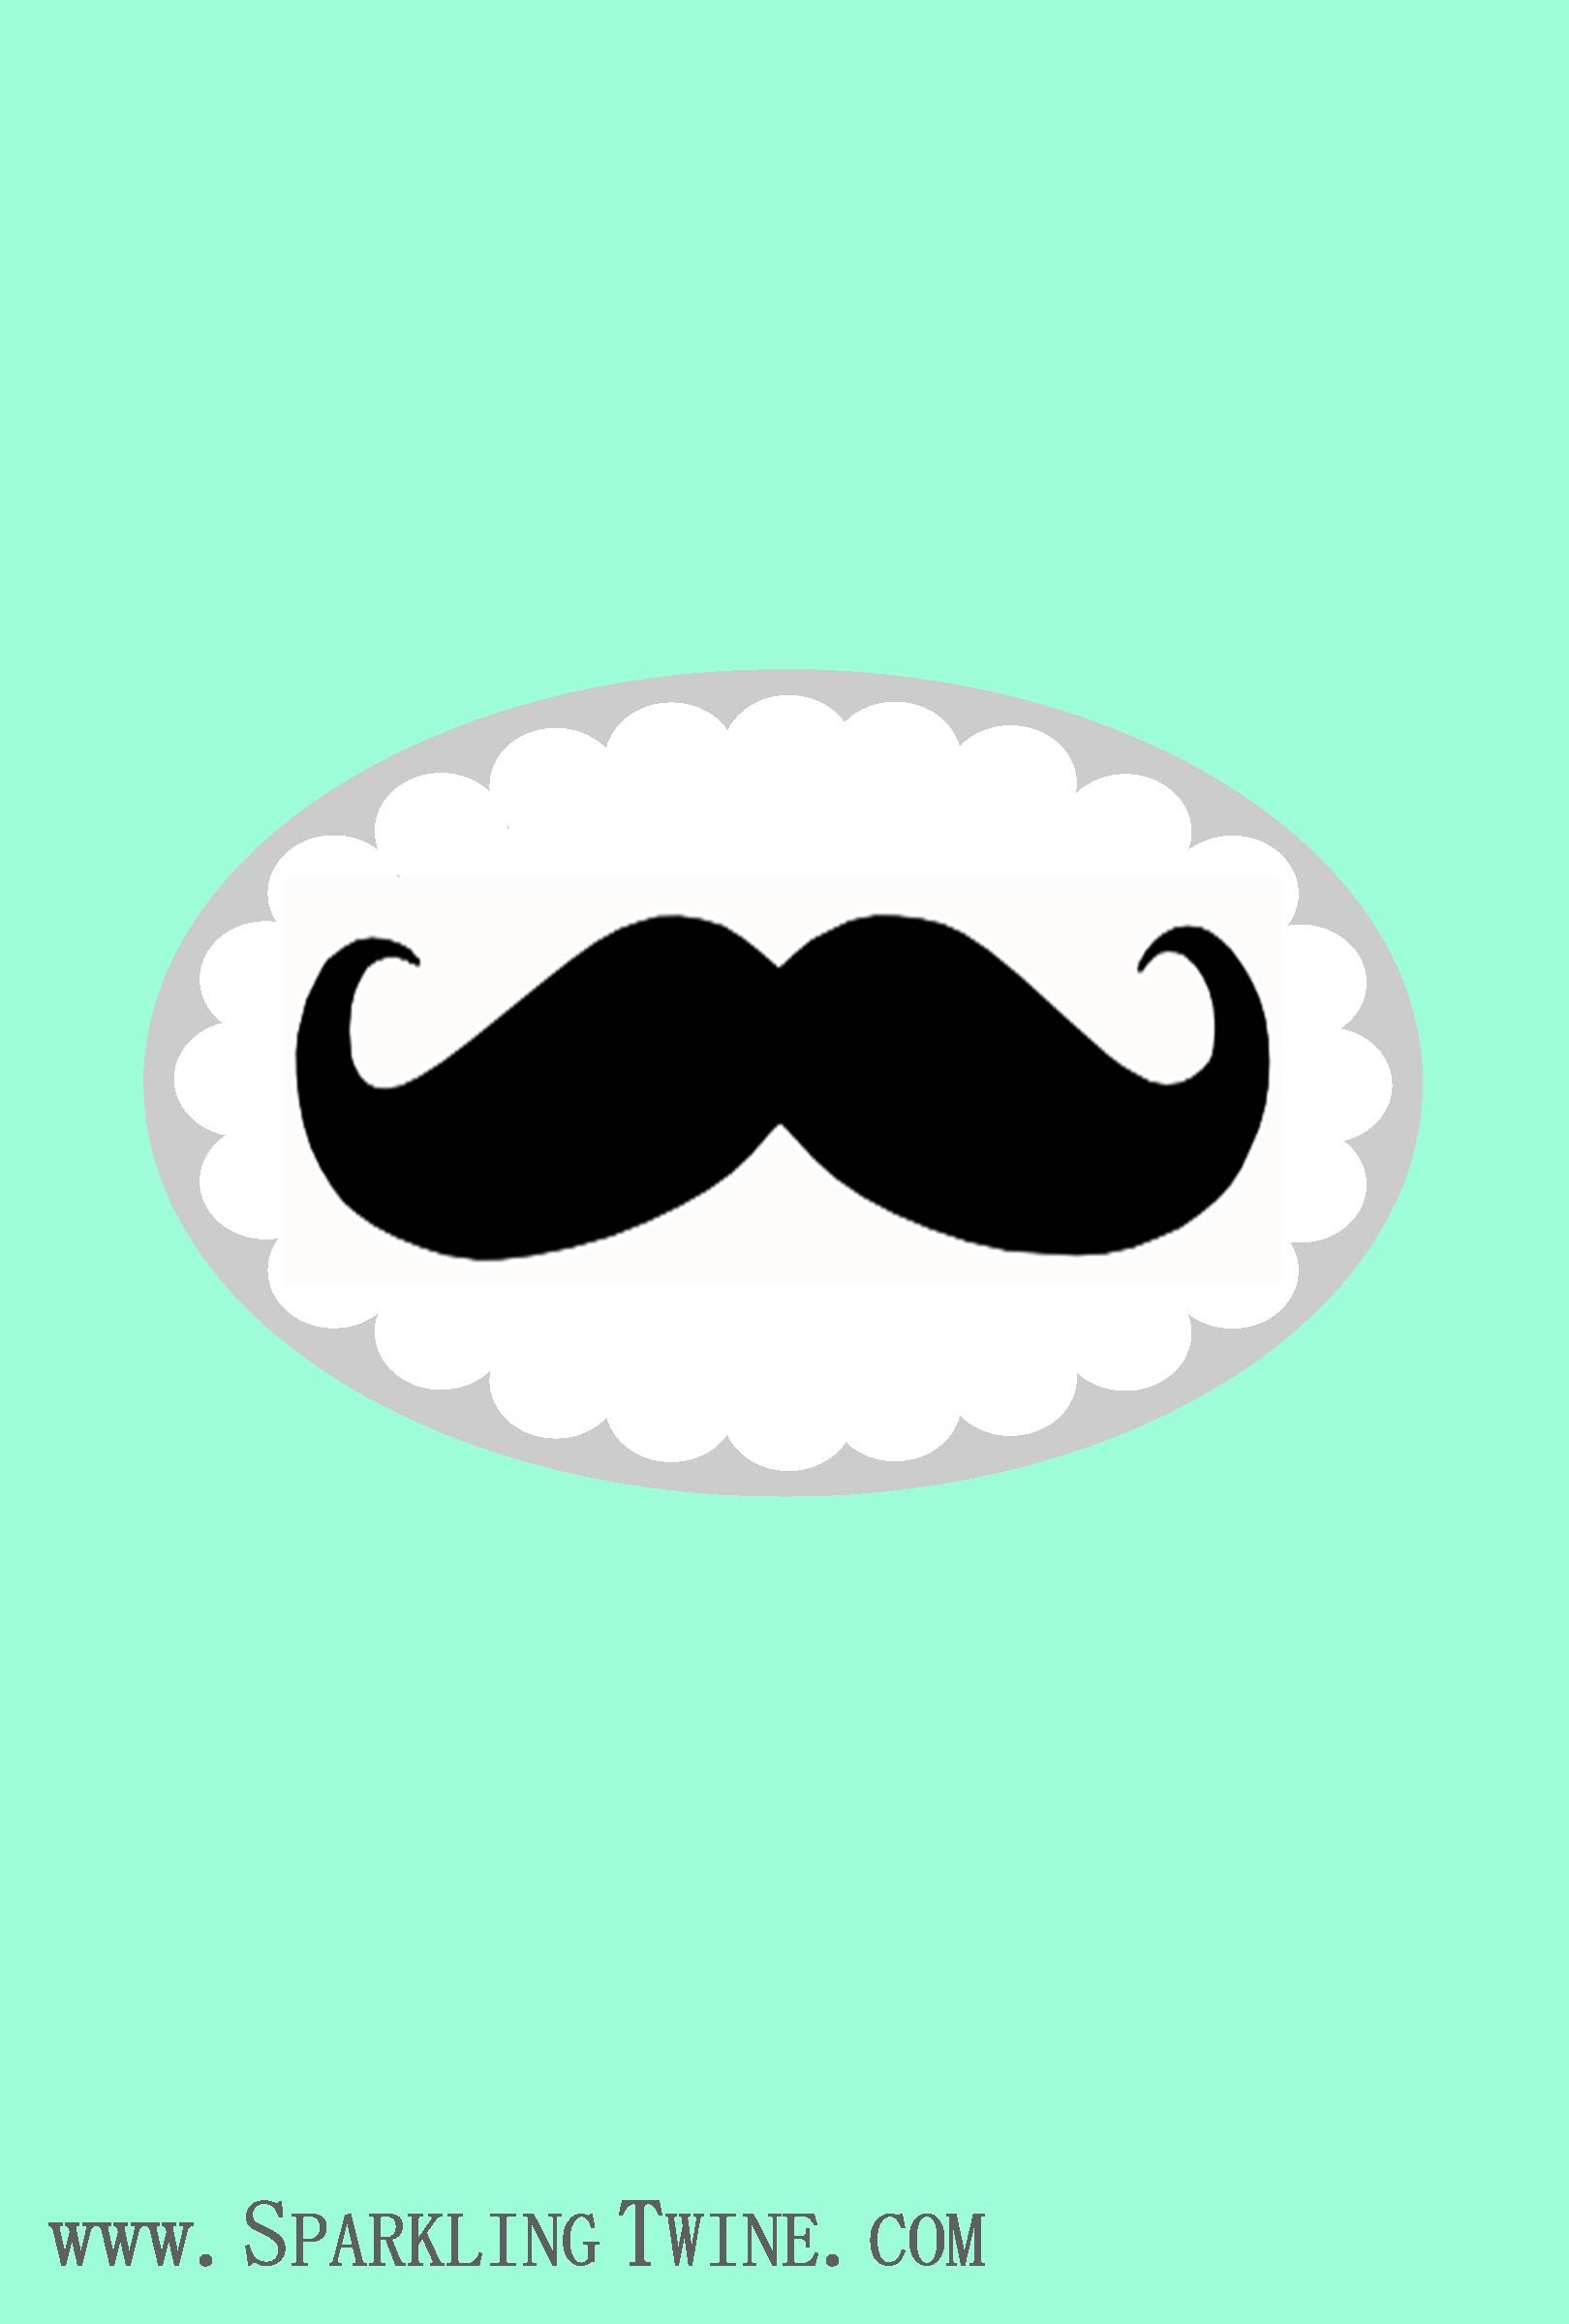 1620x2400 1024x768 Wallpapers For > Cute Girly Mustache Wallpaper